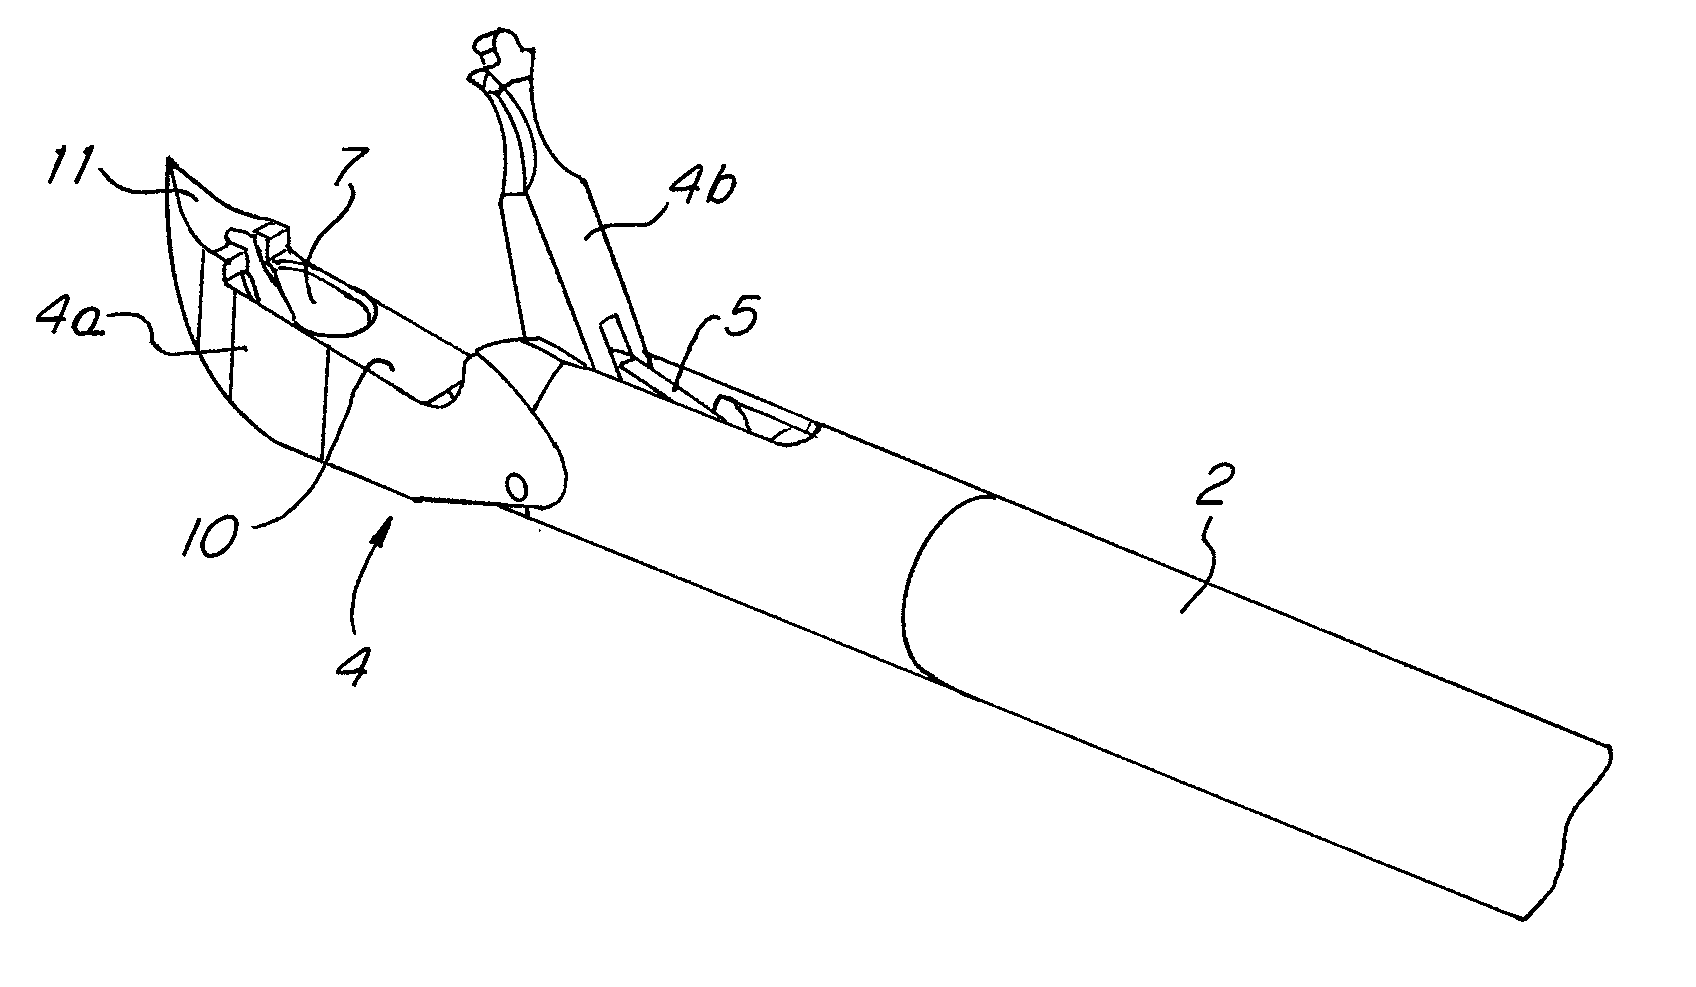 Medical instrument for grasping surgical suture material